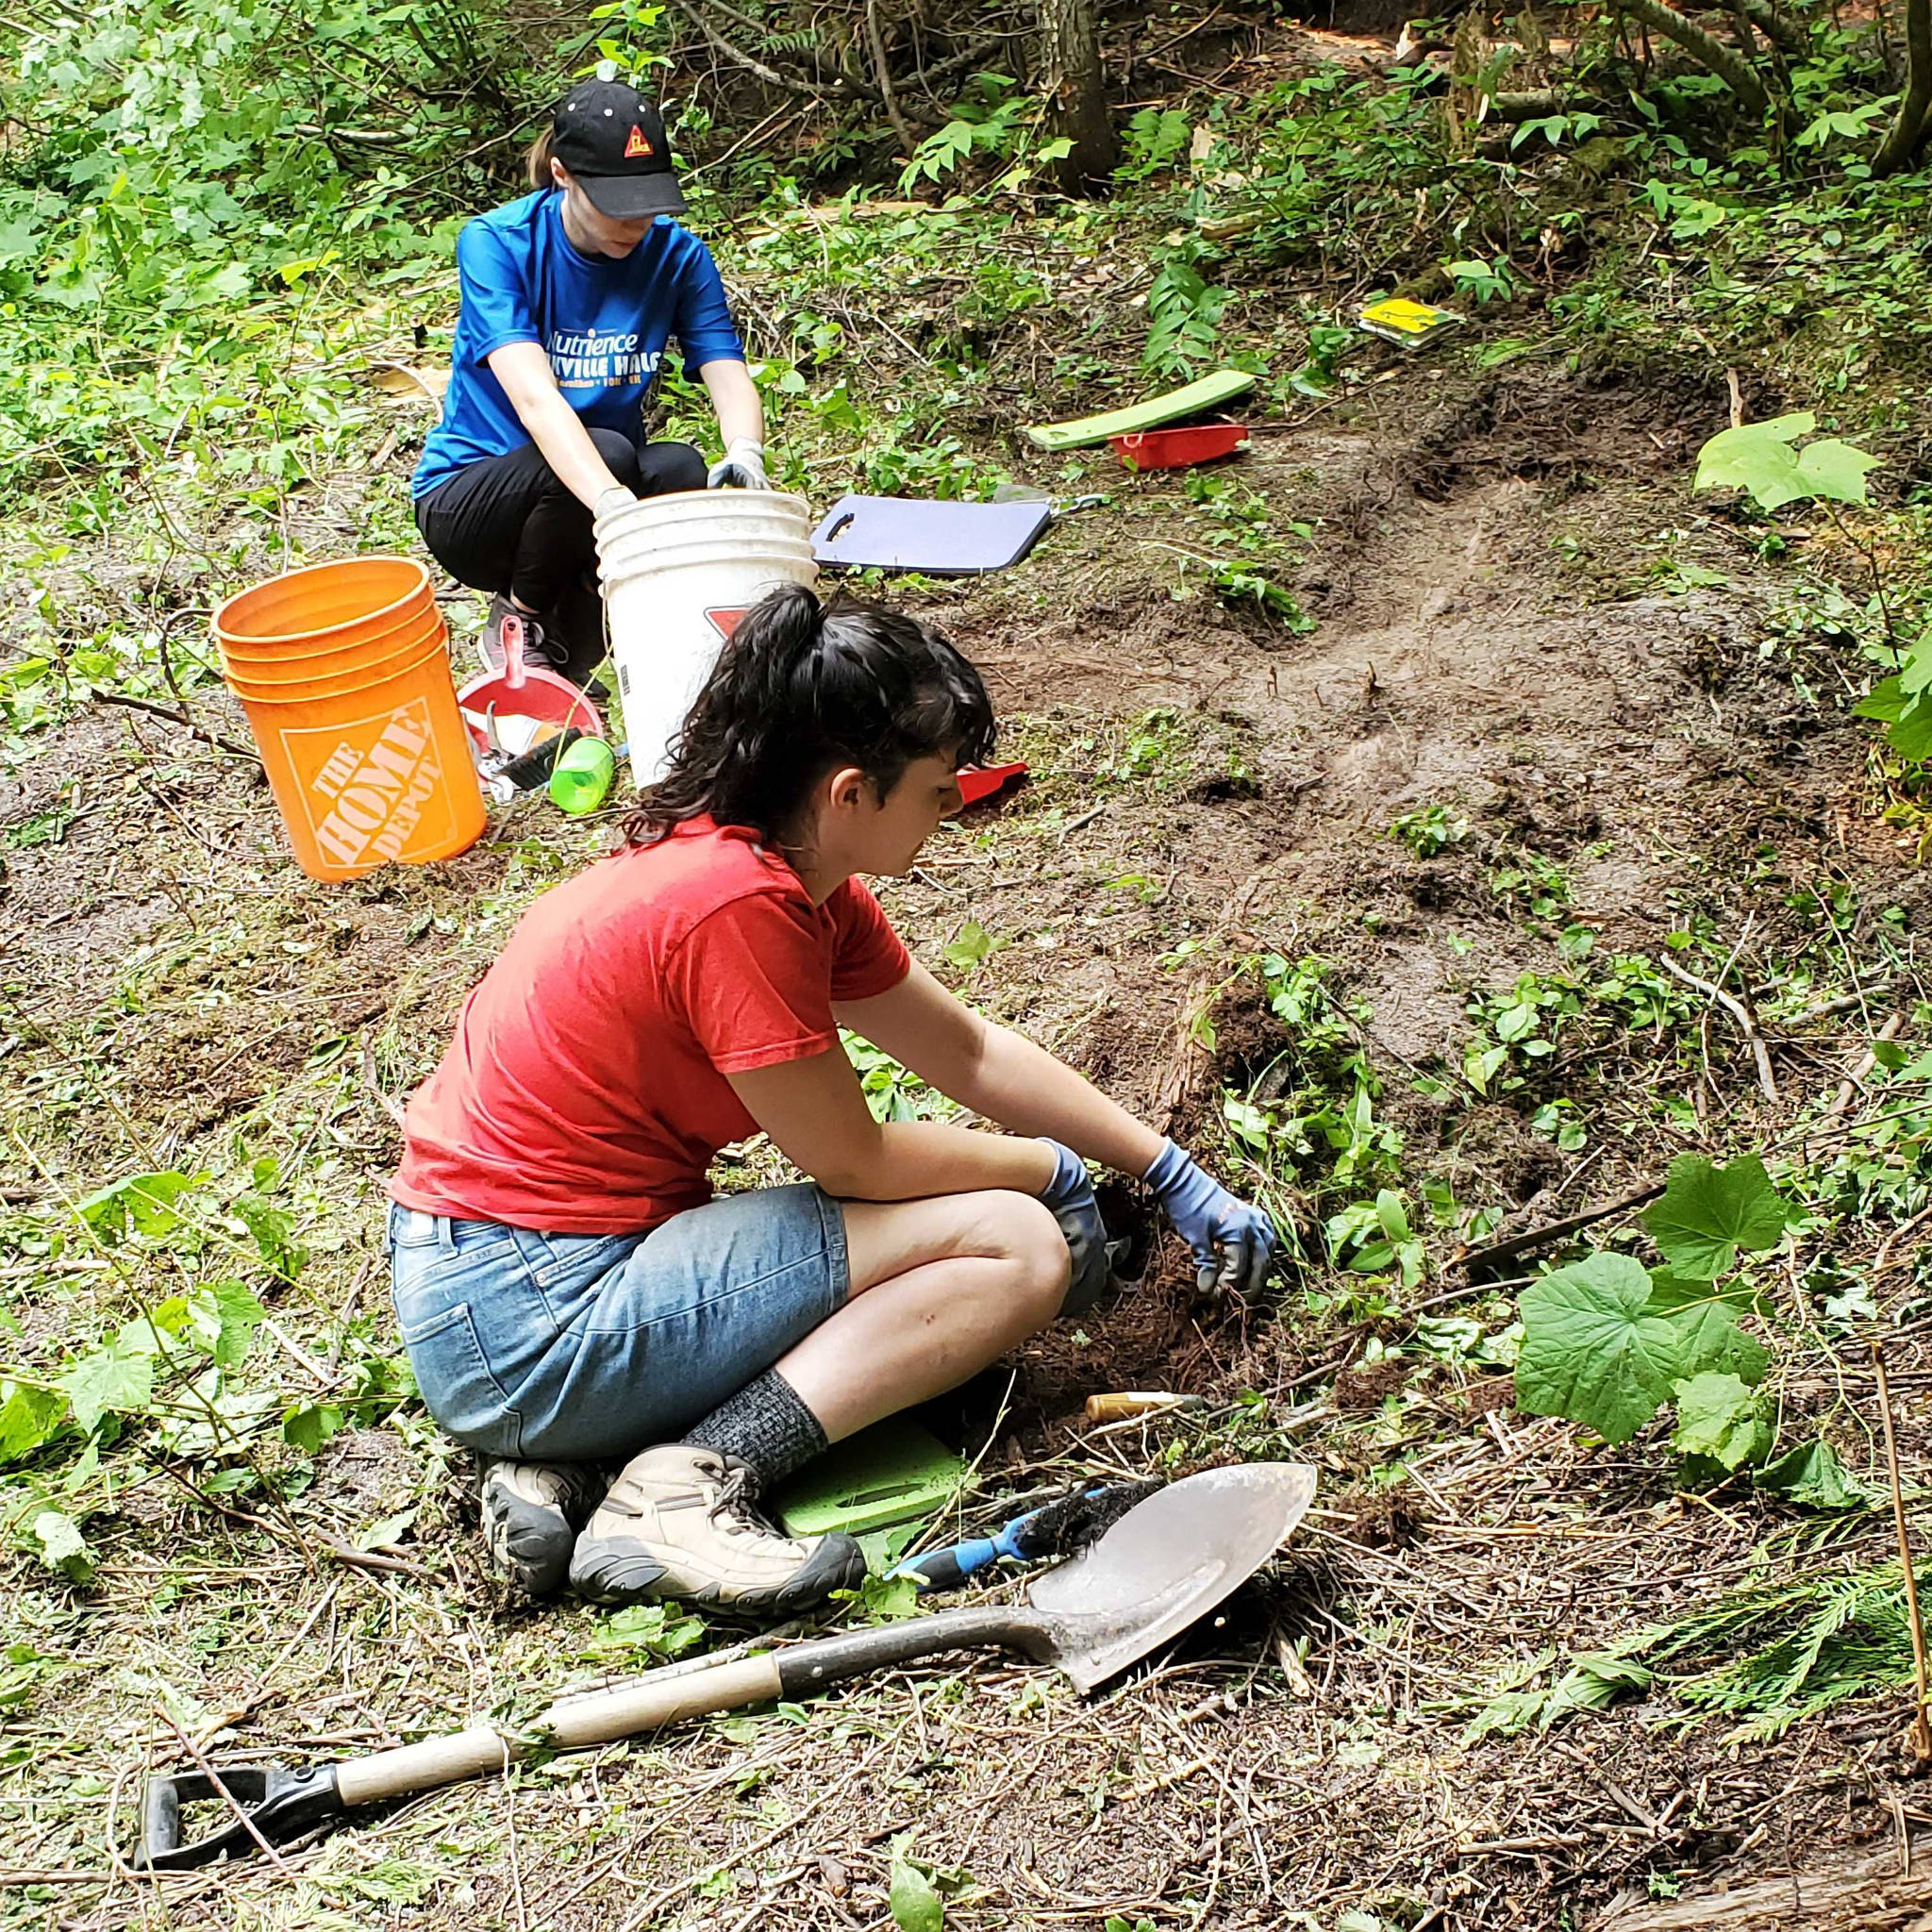 Volunteer university students Keagan Edwards of Port Moody (top) and Holly O’Neil of Maple Ridge search for artifacts at the site of the First World War Monashee Internment Camp east of Cherryville. (Roger Knox - Morning Star)